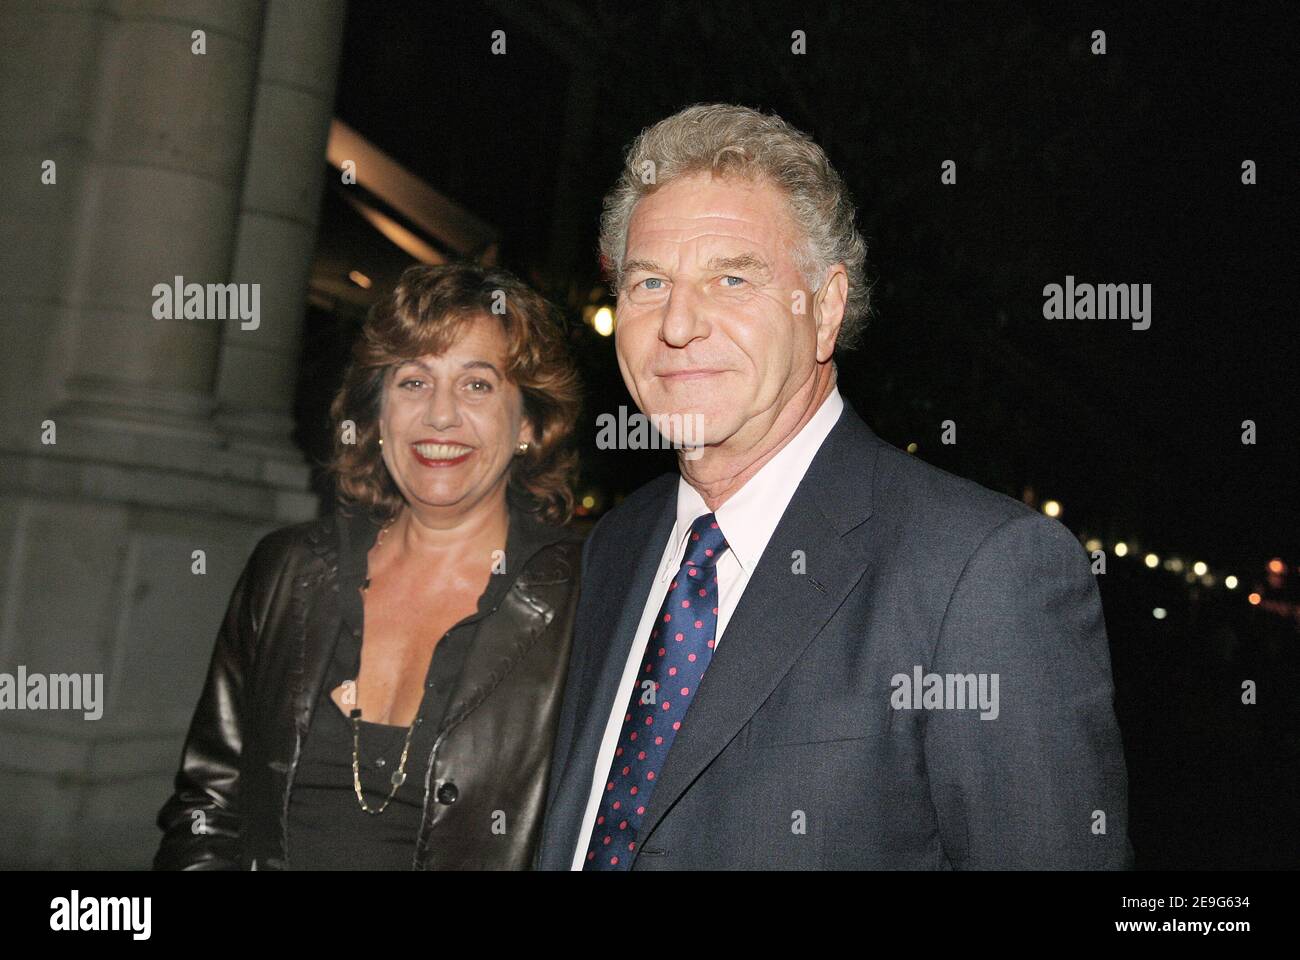 French TV journalists Robert Namias and his wife Anne Barrere arrive at the opening play of 'Les Grandes Occasions' with Jean Reno and Clementine Celarie at Edouard VII theatre in Paris, France on September 18, 2006. Photo by Denis Guignebourg/ABACAPRESS.COM Stock Photo